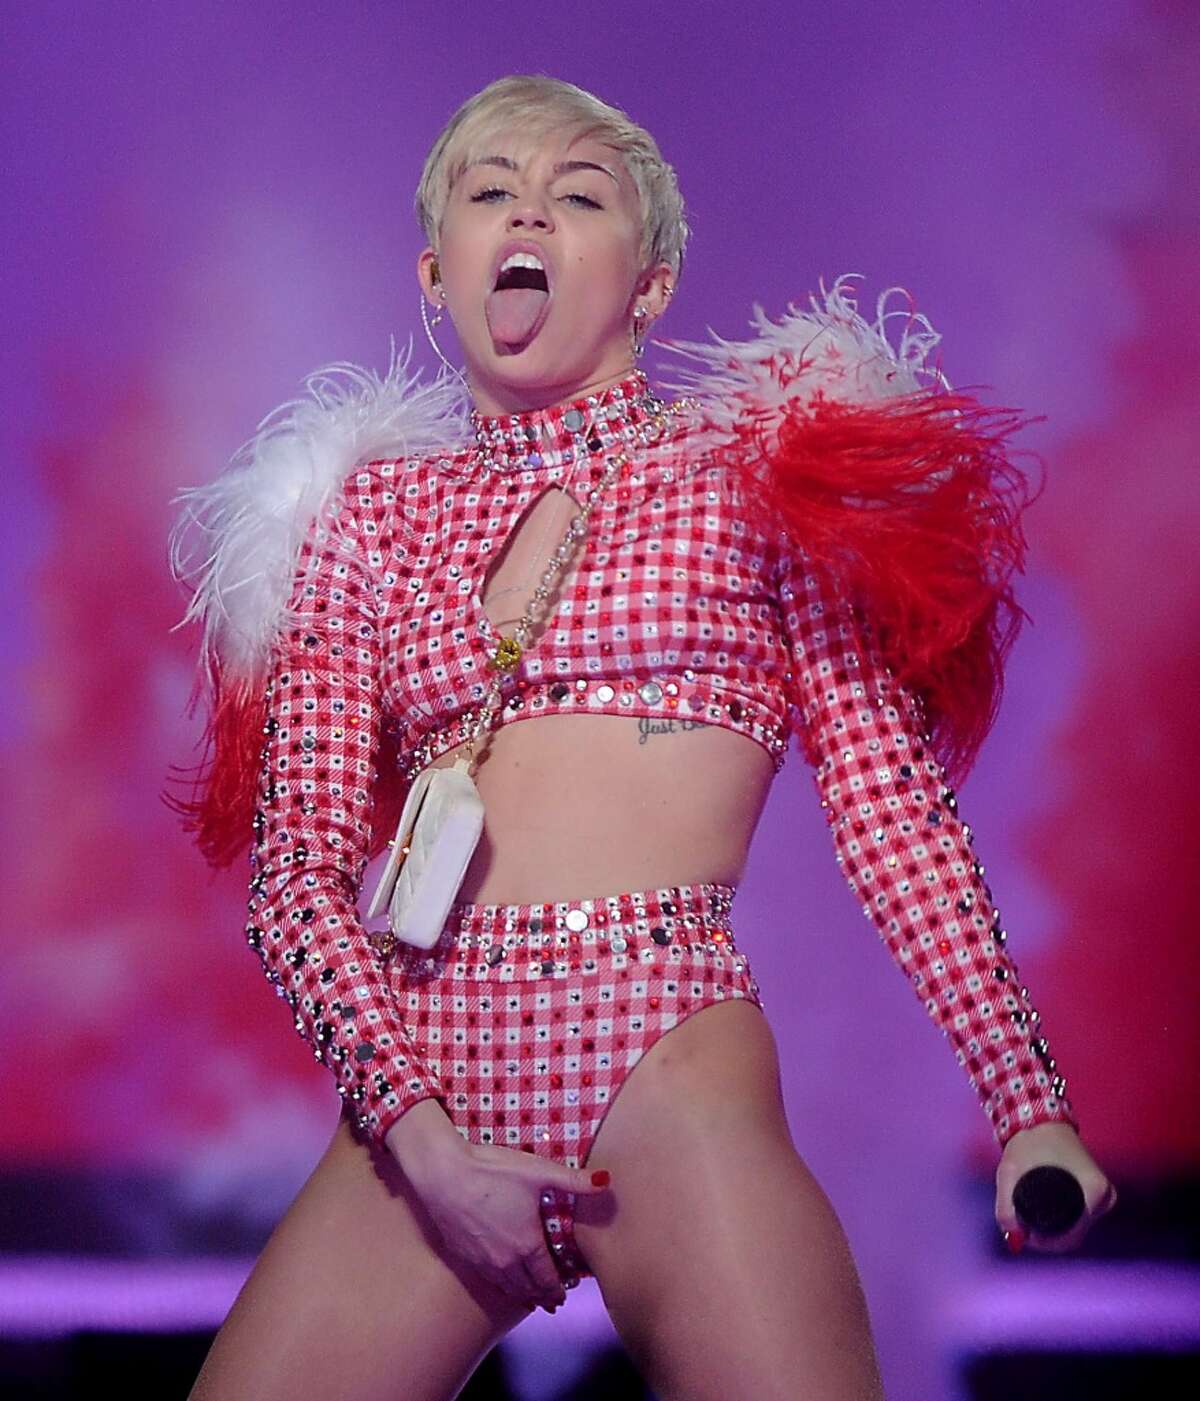 Twitter Miley Cyrus' tour bus catches fire on the road